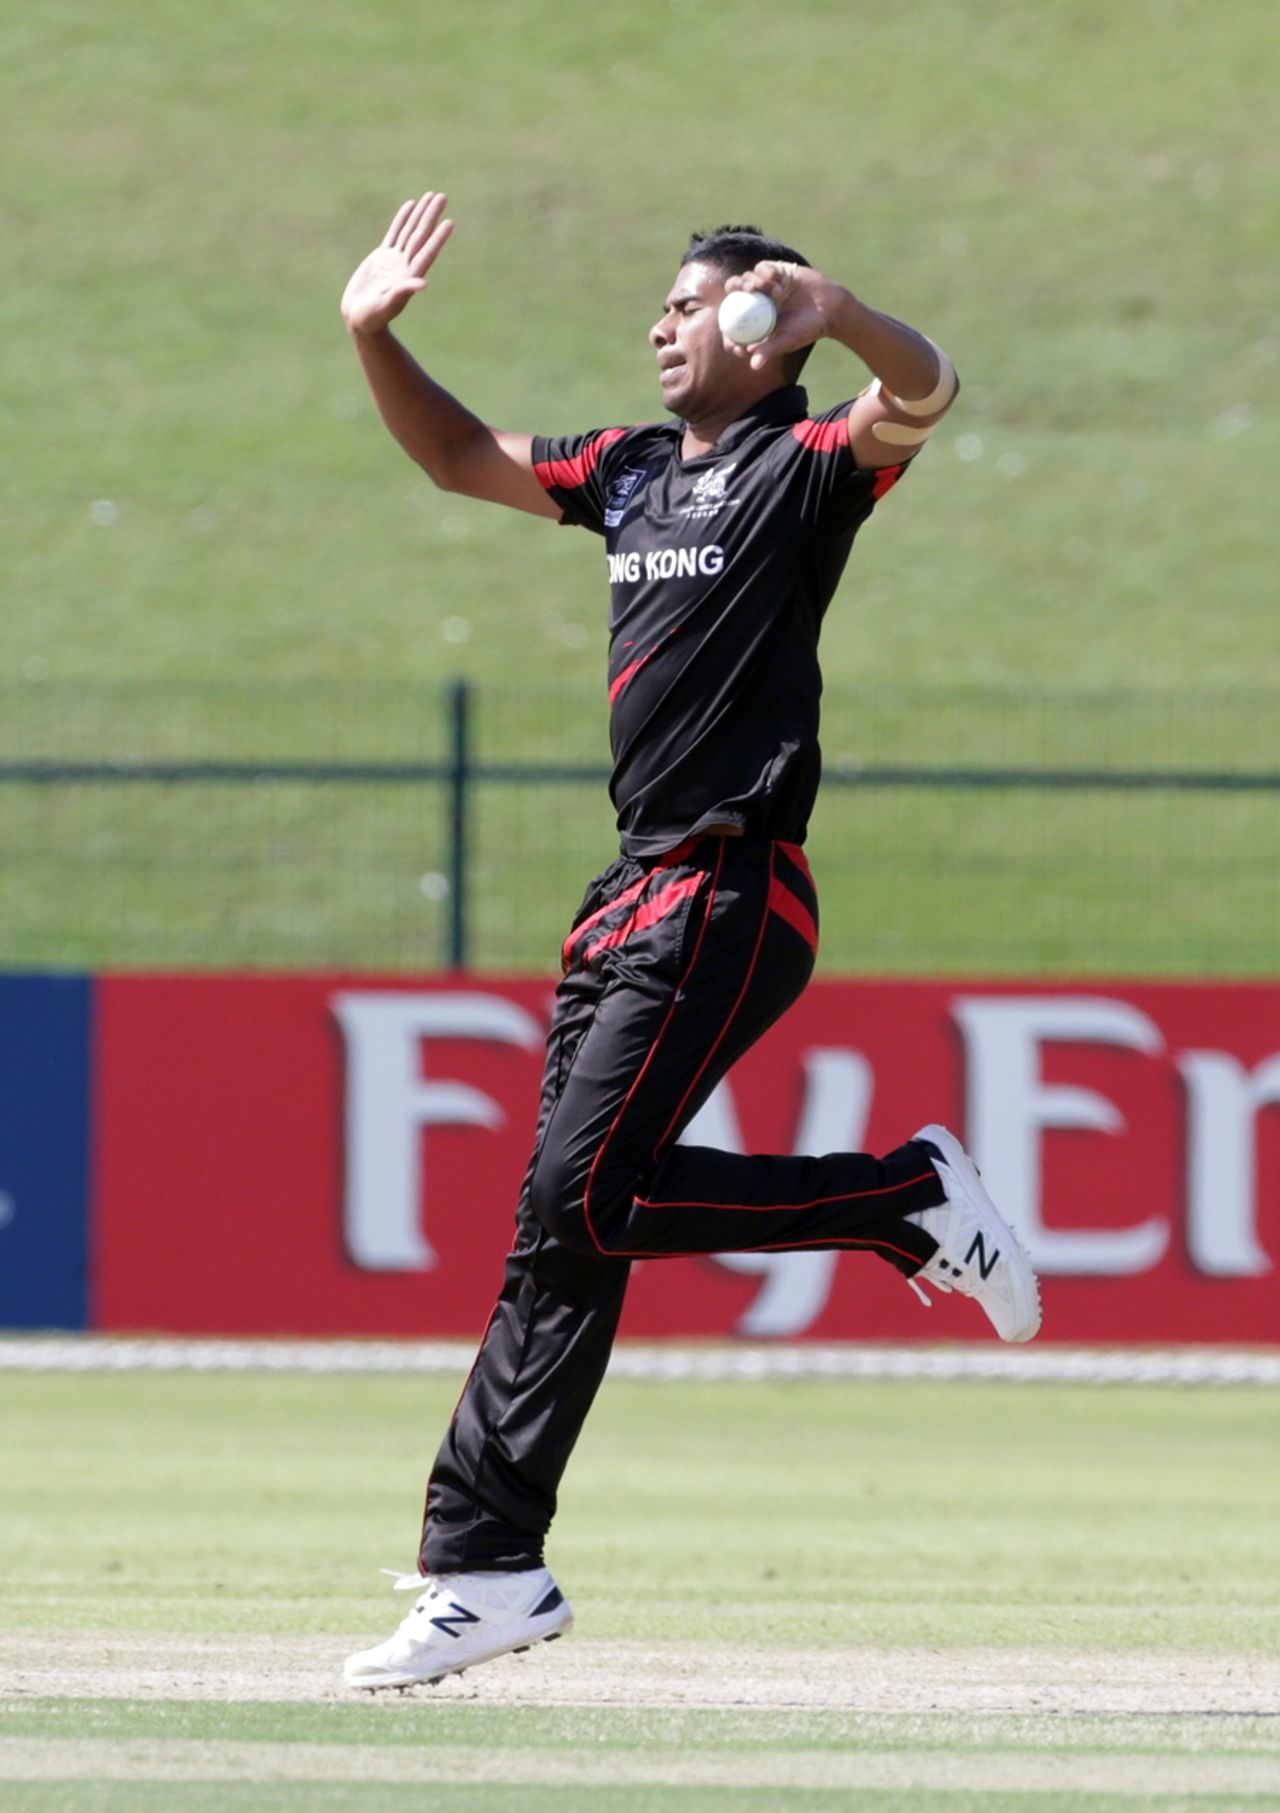 Nadeem Ahmed of Hong Kong bowling during the Hong Kong v Nepal Quarter Final match 60 at the ICC World Twenty20 Qualifiers at the Zayed Cricket Stadium on November 27, 2013 in Abu Dhabi, United Arab Emirates. (Photo by Graham Crouch-IDI/IDI via Getty Images)